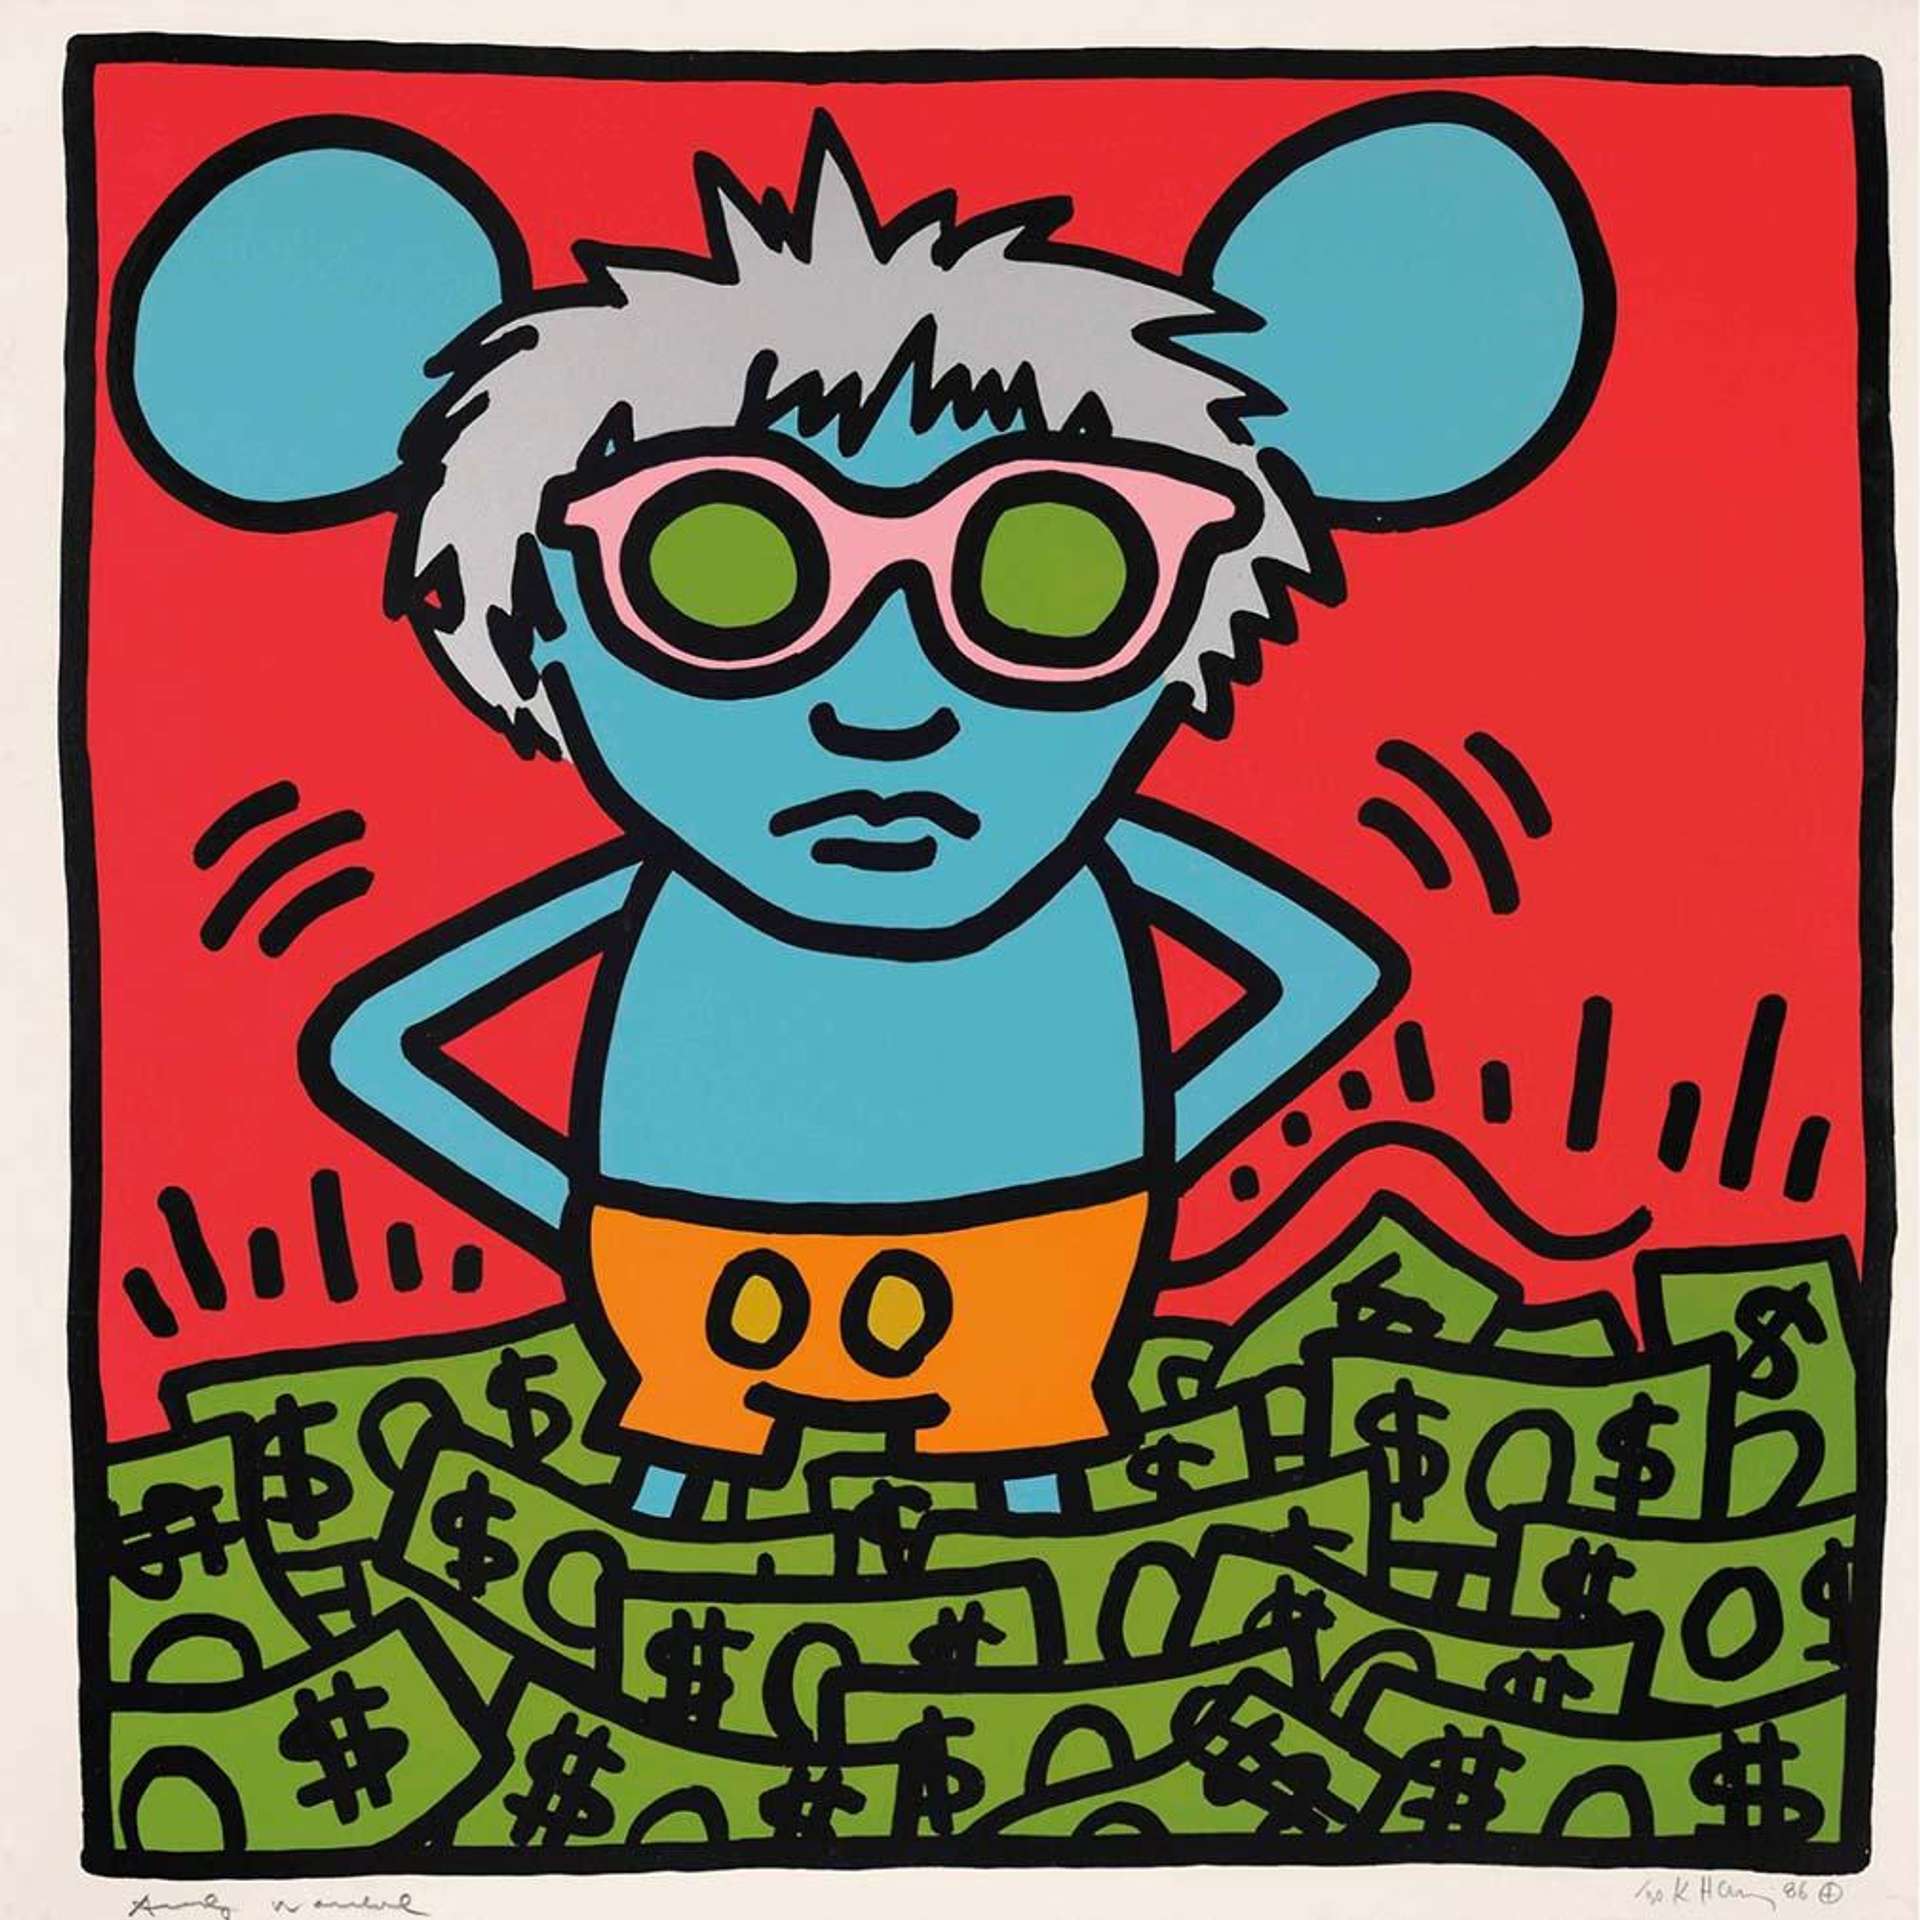 Cartoon Andy mouse standing in a sea of green dollar bills